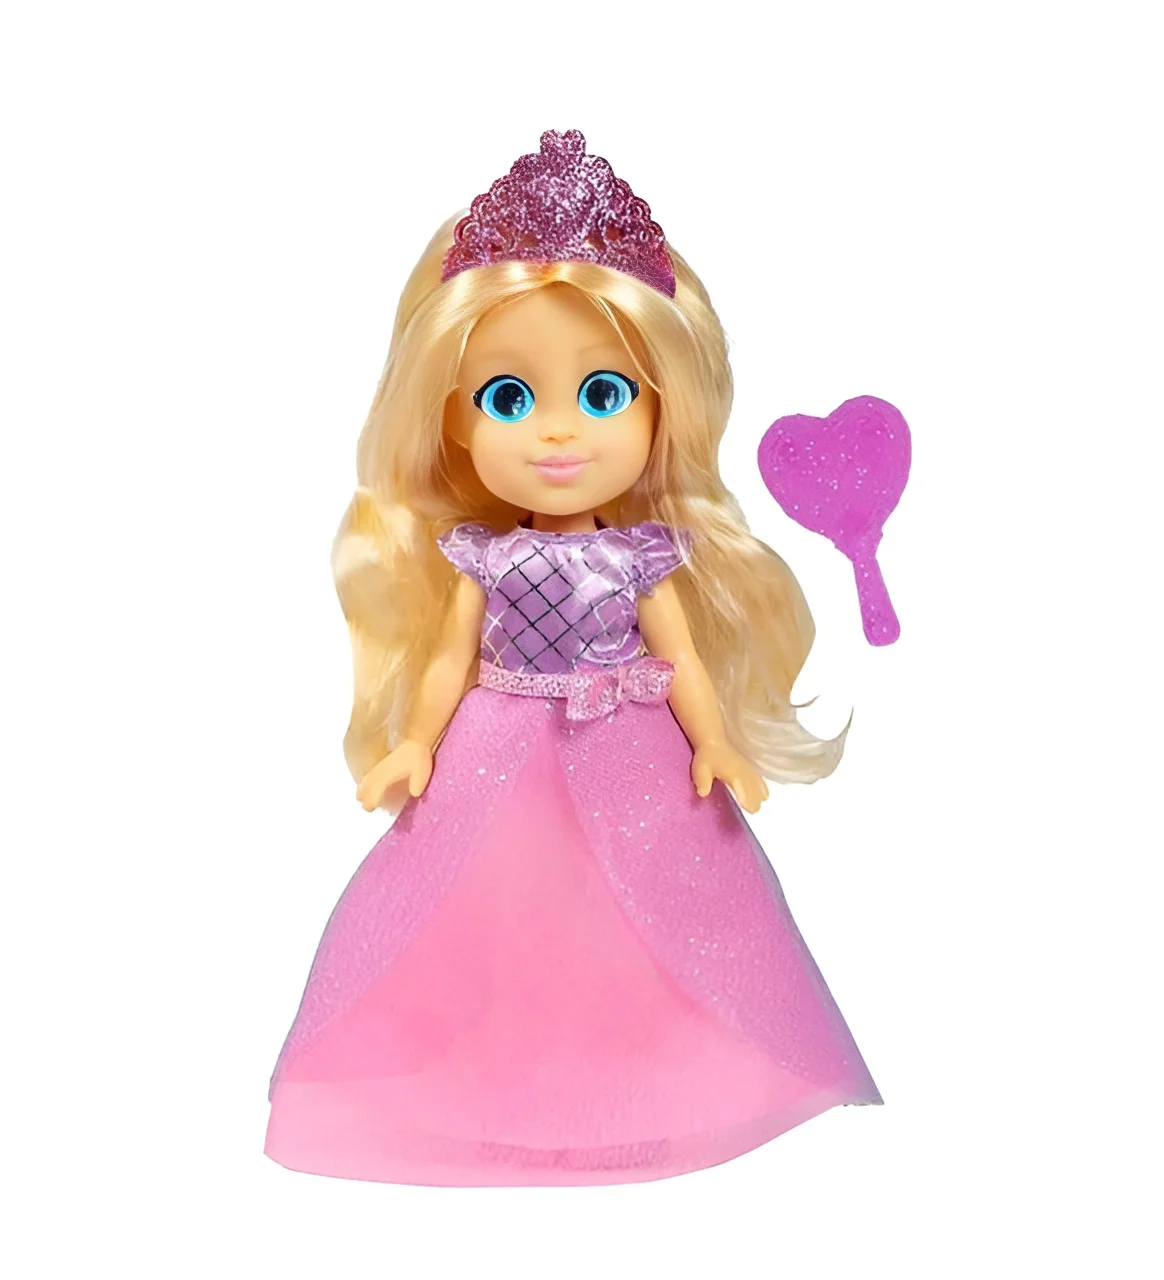 Love Diana Cloth Doll 15 Cm Toy Children Toy Mom & Kids Profession Groups Doctor Princess And Birthday Baby Fun Game diana princess of wales tribute 2cd